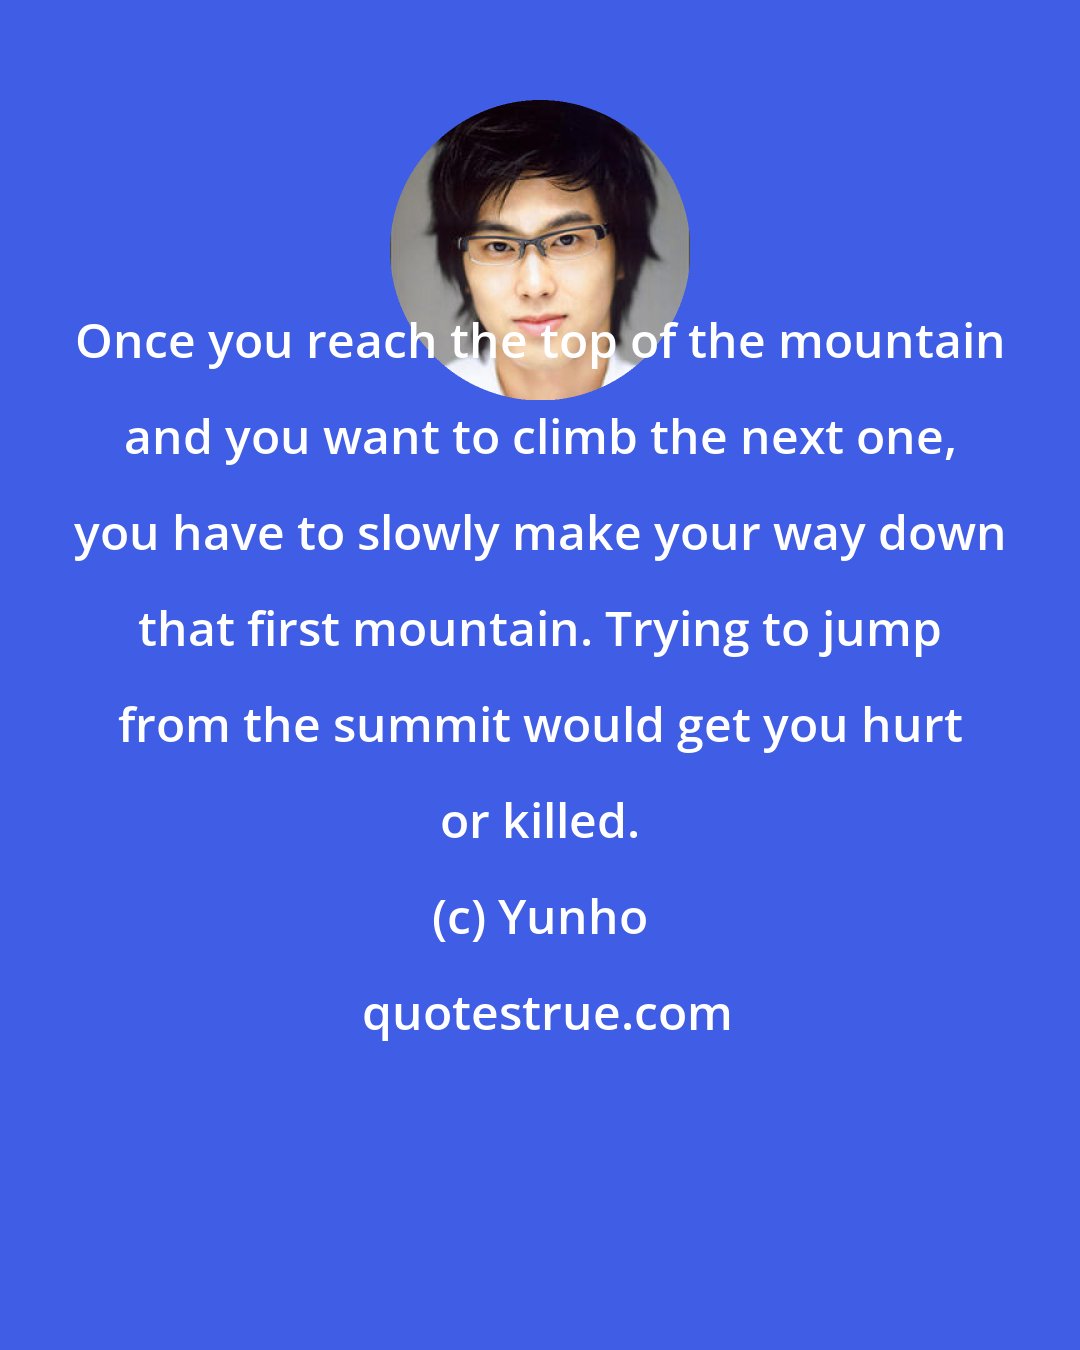 Yunho: Once you reach the top of the mountain and you want to climb the next one, you have to slowly make your way down that first mountain. Trying to jump from the summit would get you hurt or killed.